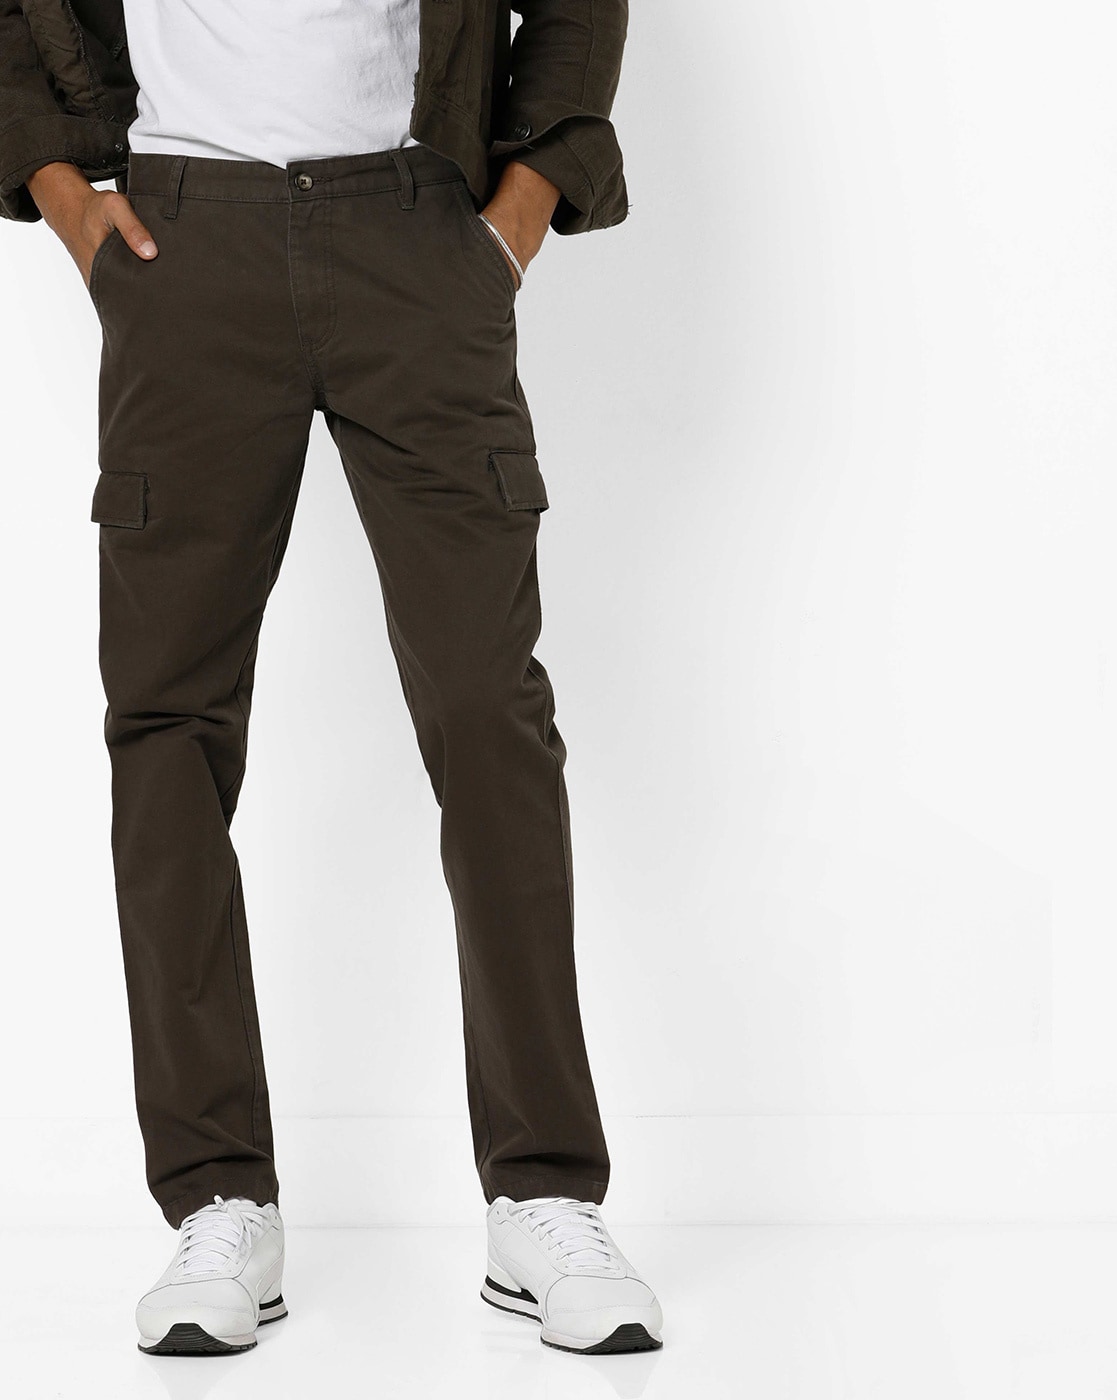 Buy Cream Trousers & Pants for Men by LOUIS PHILIPPE Online | Ajio.com